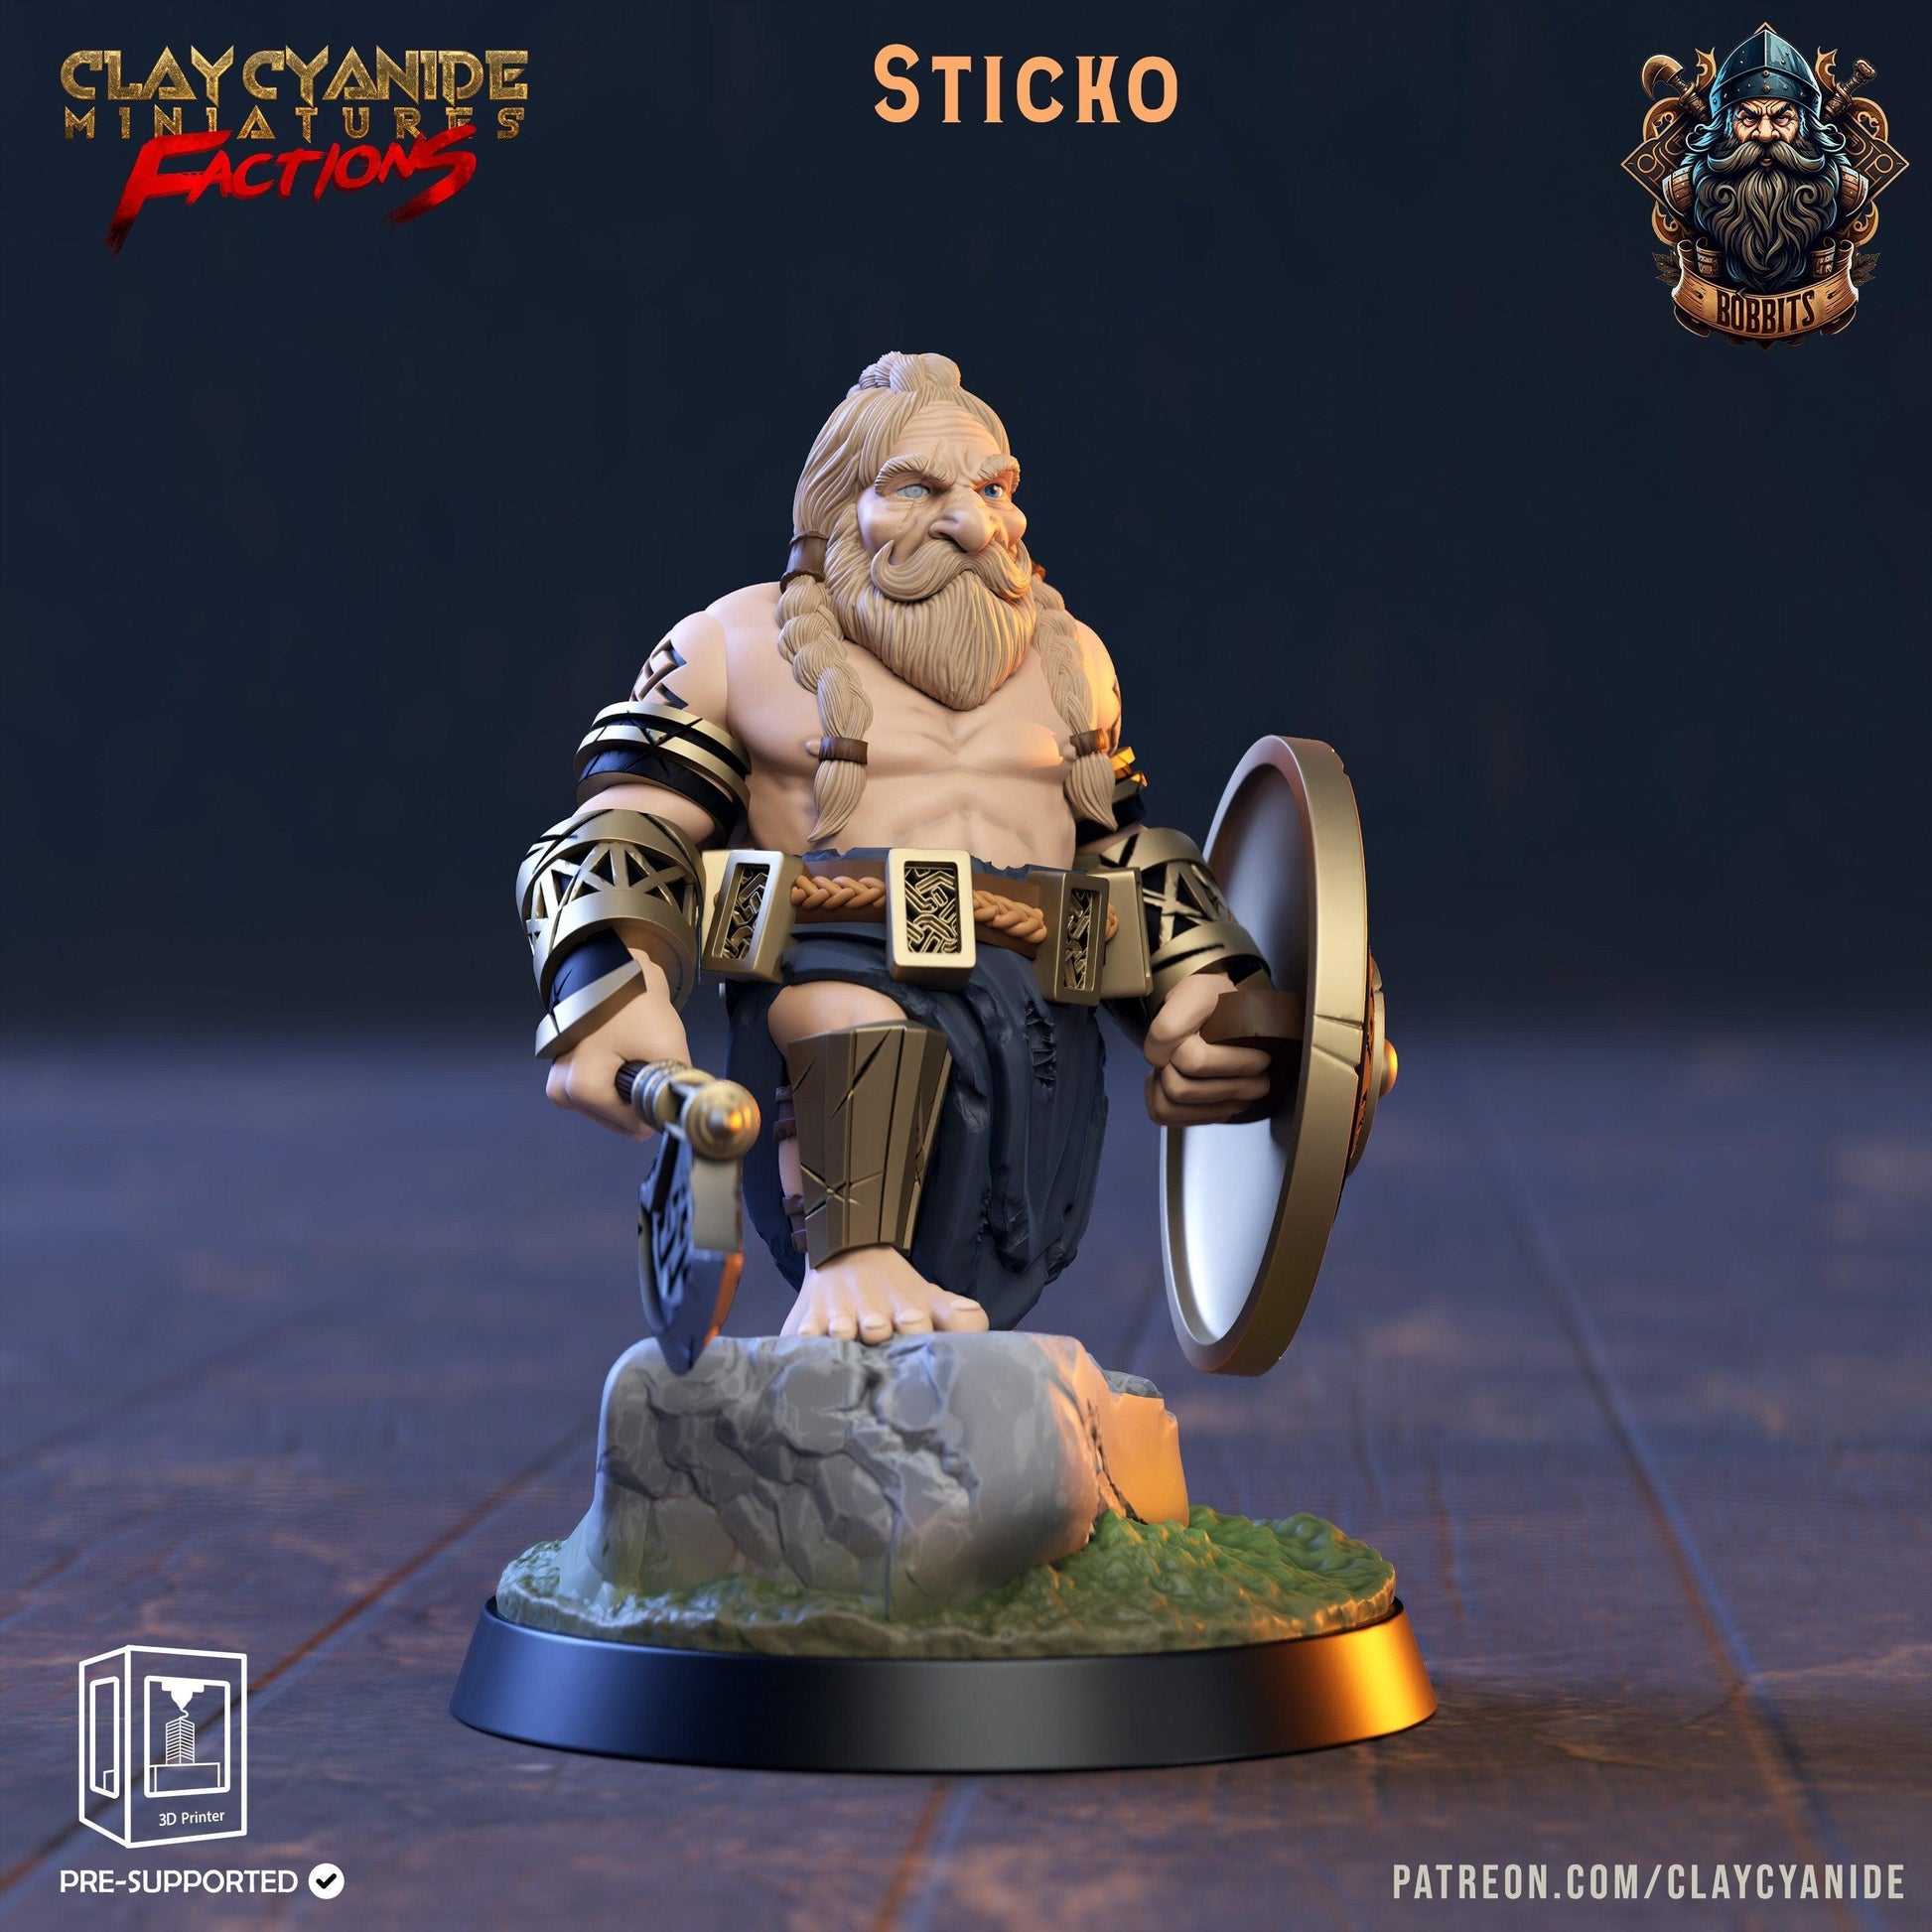 Sticko DnD Miniature: Valiant Dwarf Warrior from The Bobbits Guild 32mm Scale - Plague Miniatures shop for DnD Miniatures